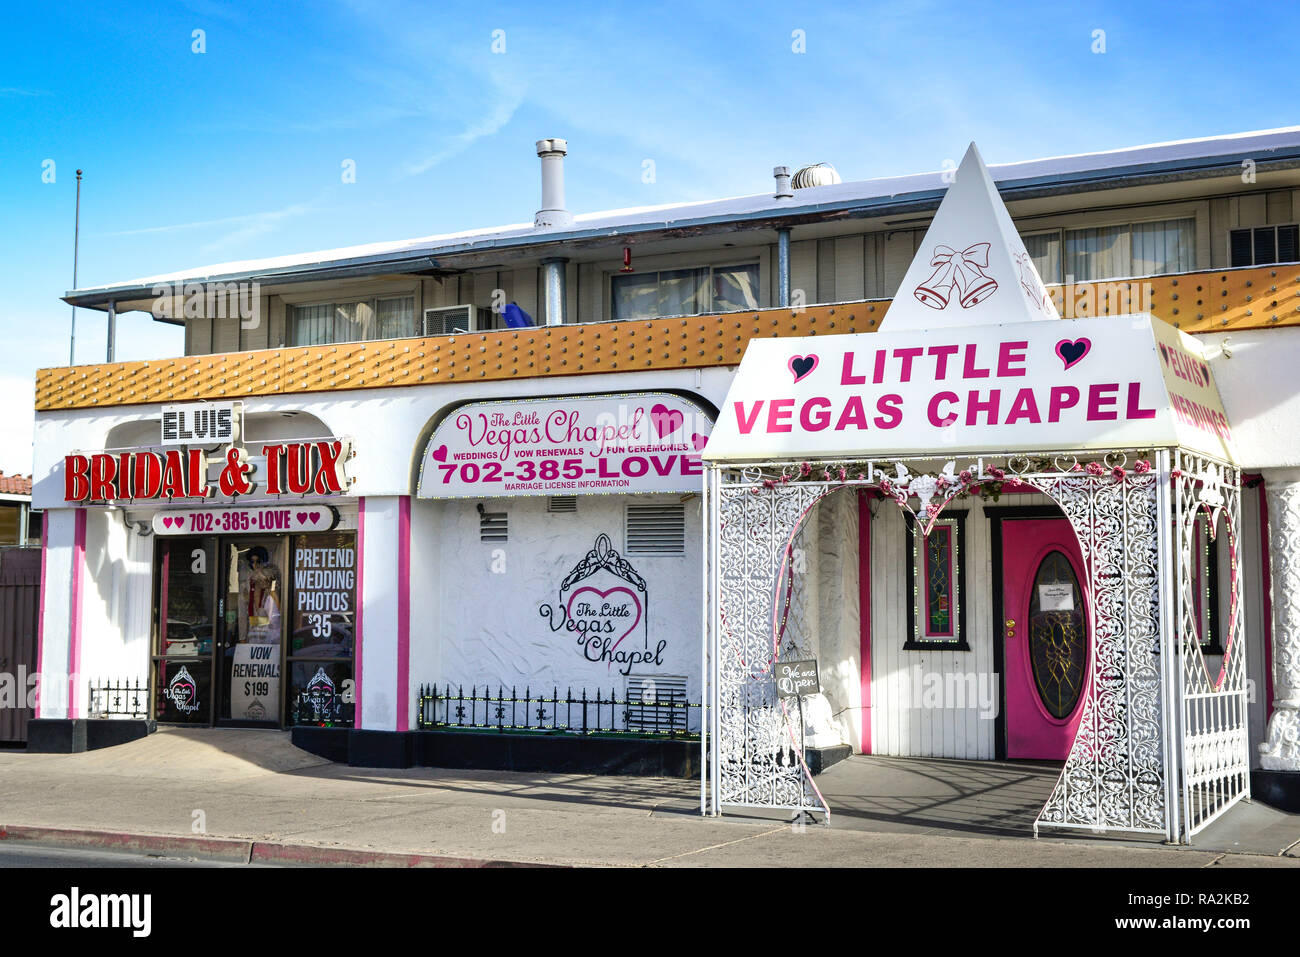 The Little Vegas Chapel, offers weddings, renewals and an option for Elvis ceremonies, it's  cheesy yet popular for a quickie wedding, on the Las Vega Stock Photo